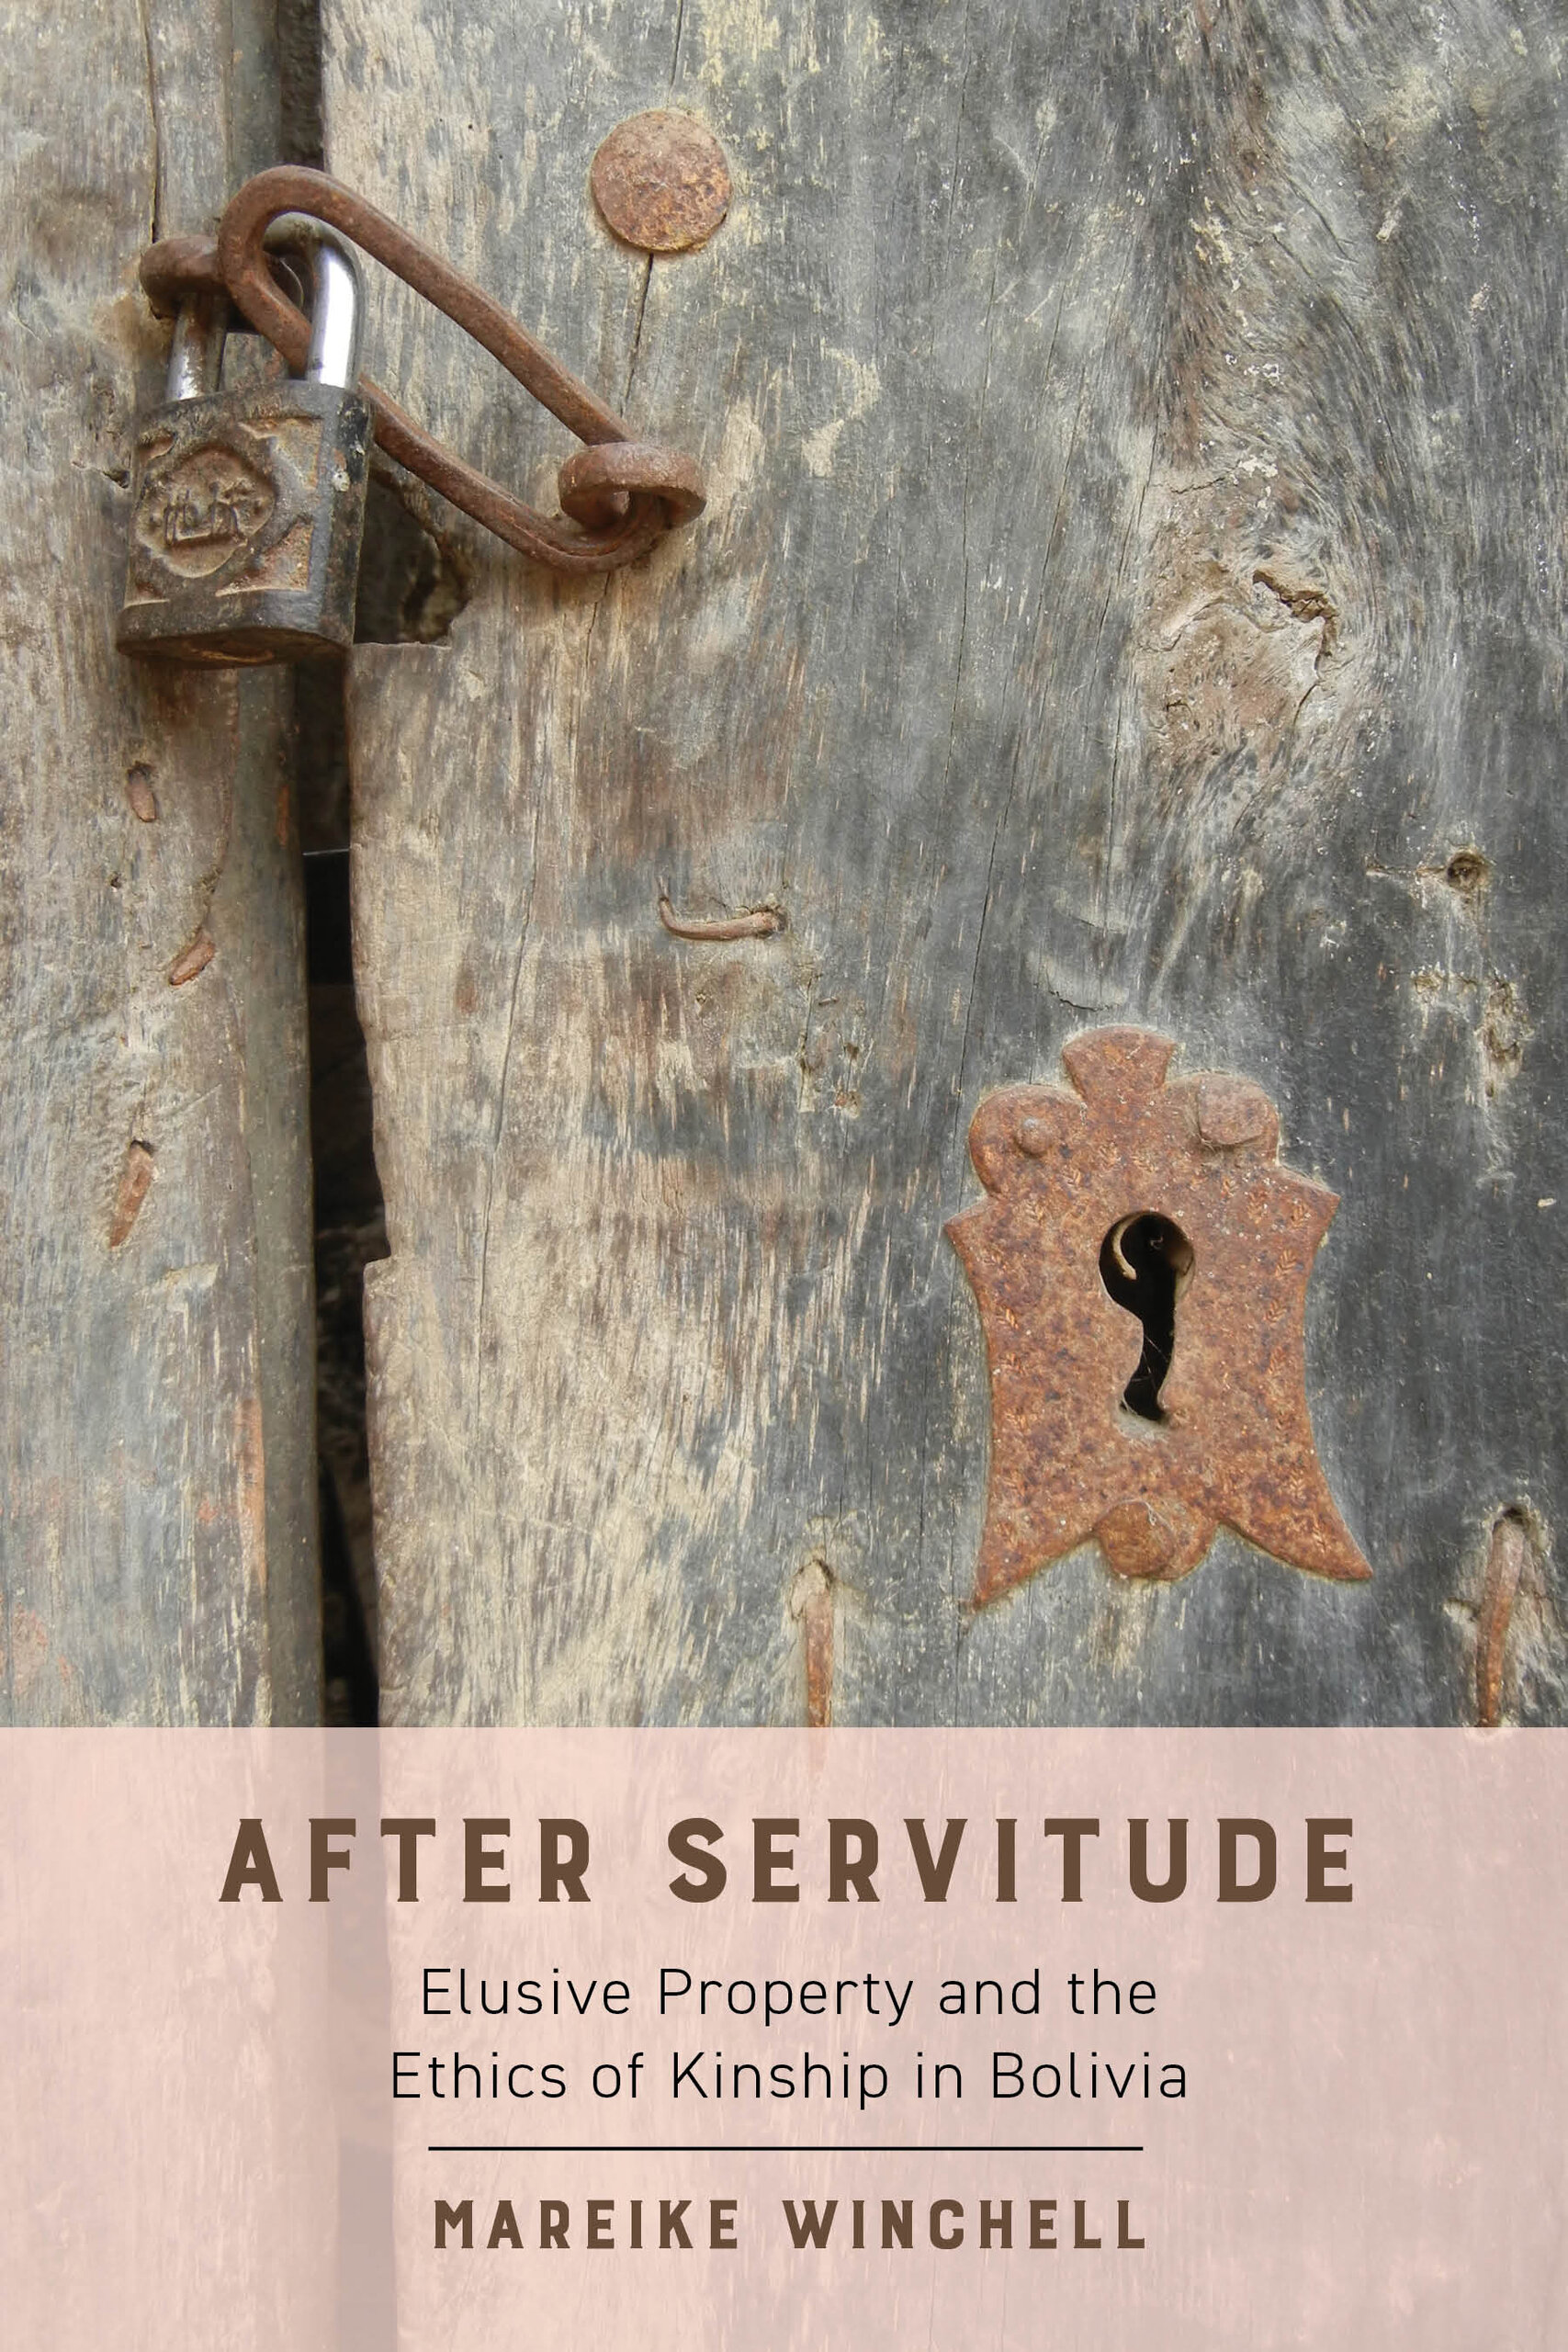 Book cover of After Servitude by Mareike Winchell. Photo of a wooden door locked with a padlock.